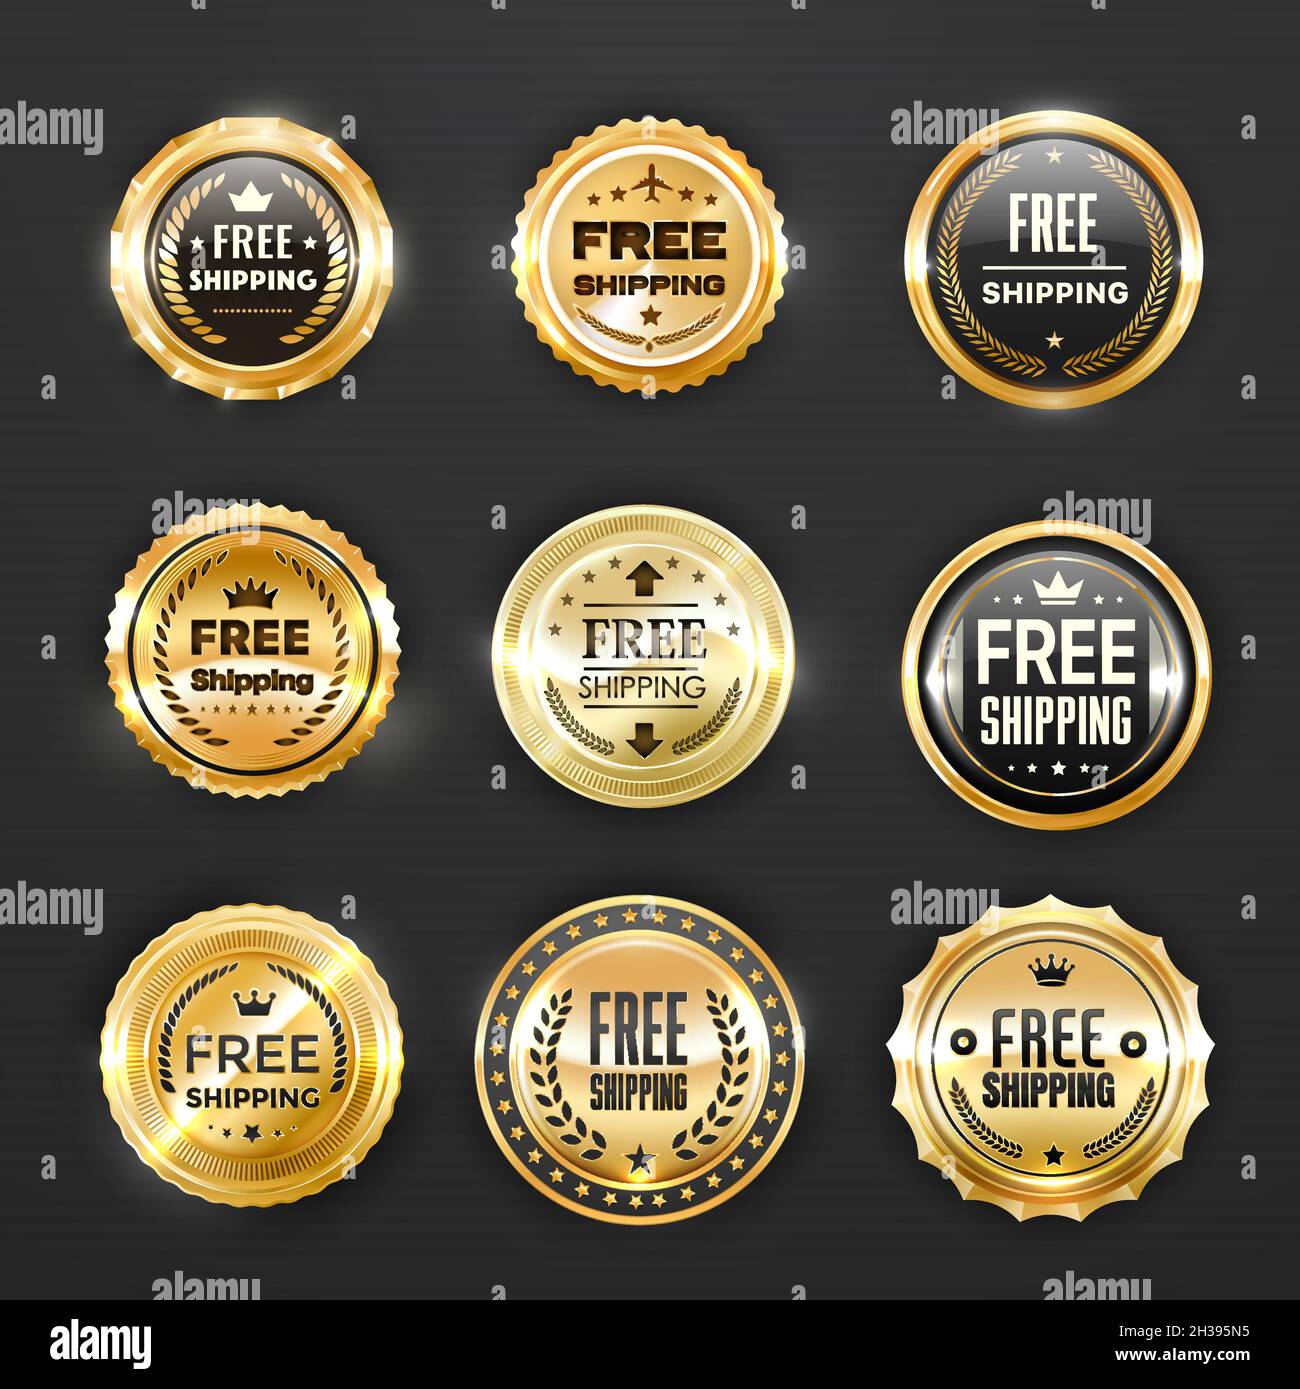 Free shipping and delivery golden labels, seal, medal badges with laurel wreaths and crowns. Sale or discount offer promotion, service warranty, premi Stock Vector